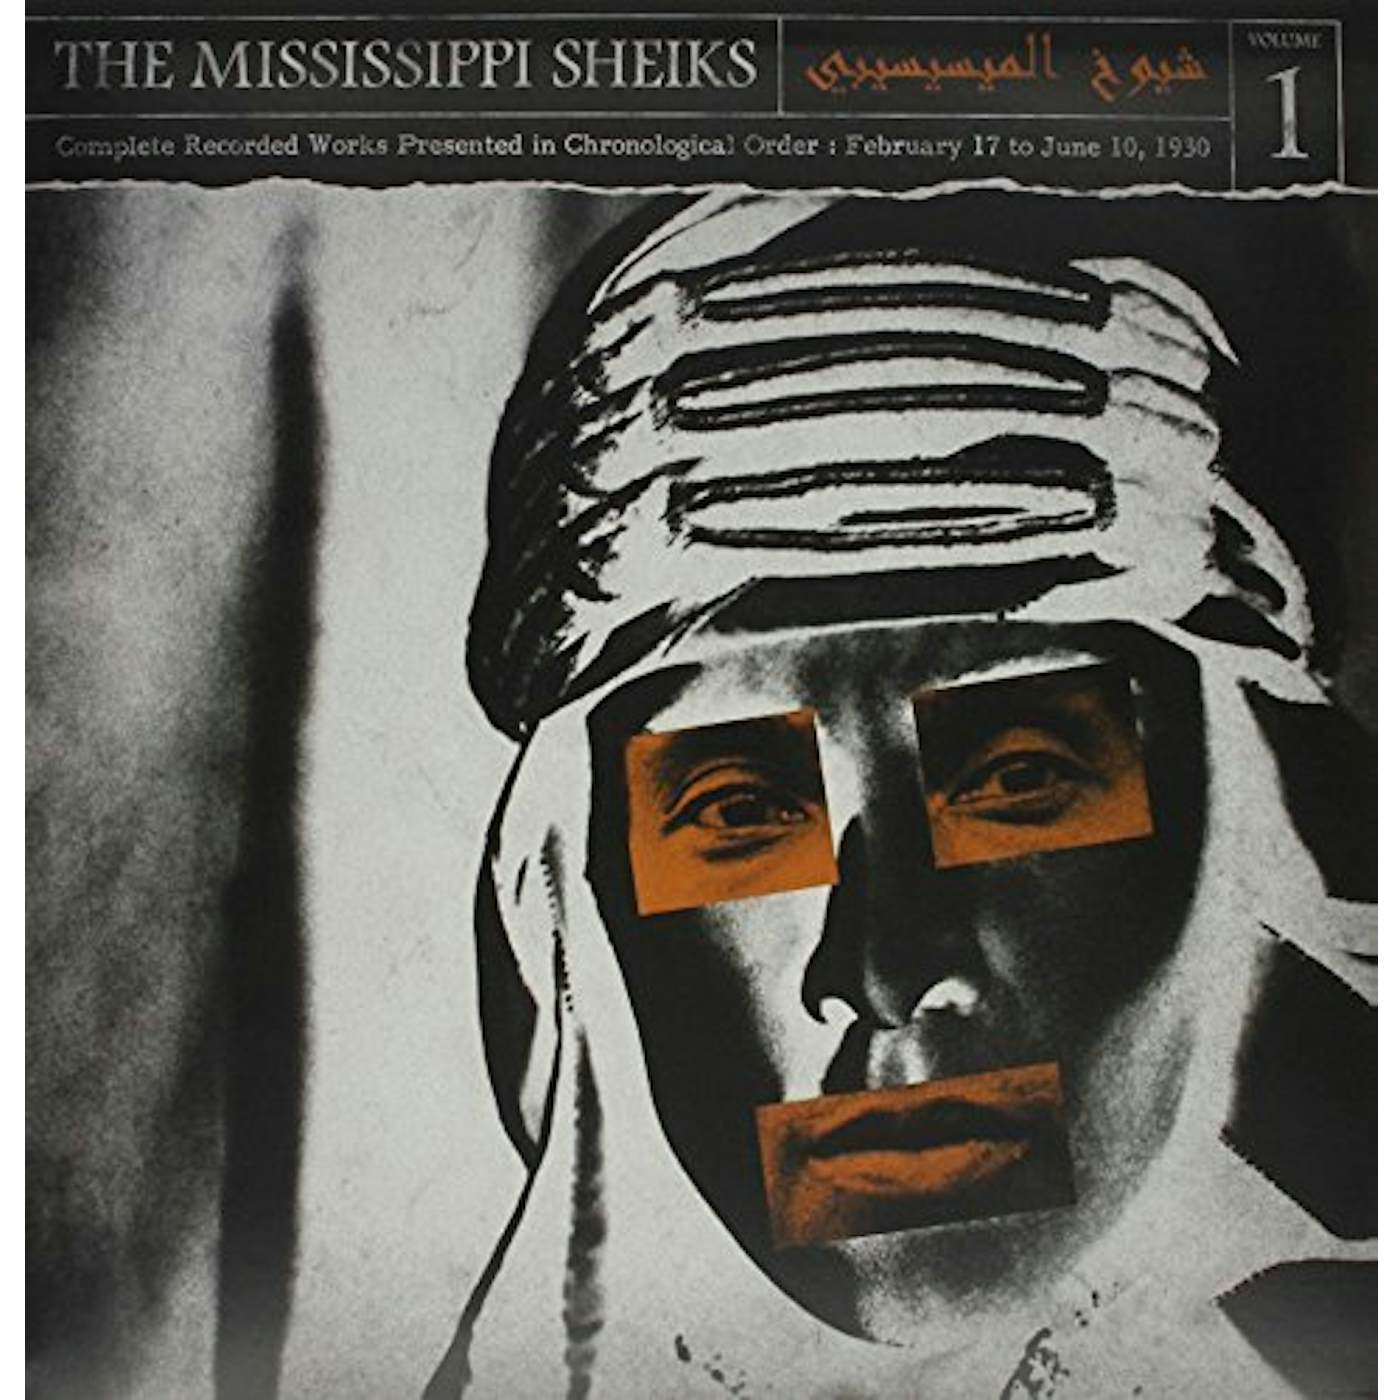 Mississippi Sheiks COMPLETE RECORDED WORKS IN CHRONOLOGICAL ORDER 1 Vinyl Record